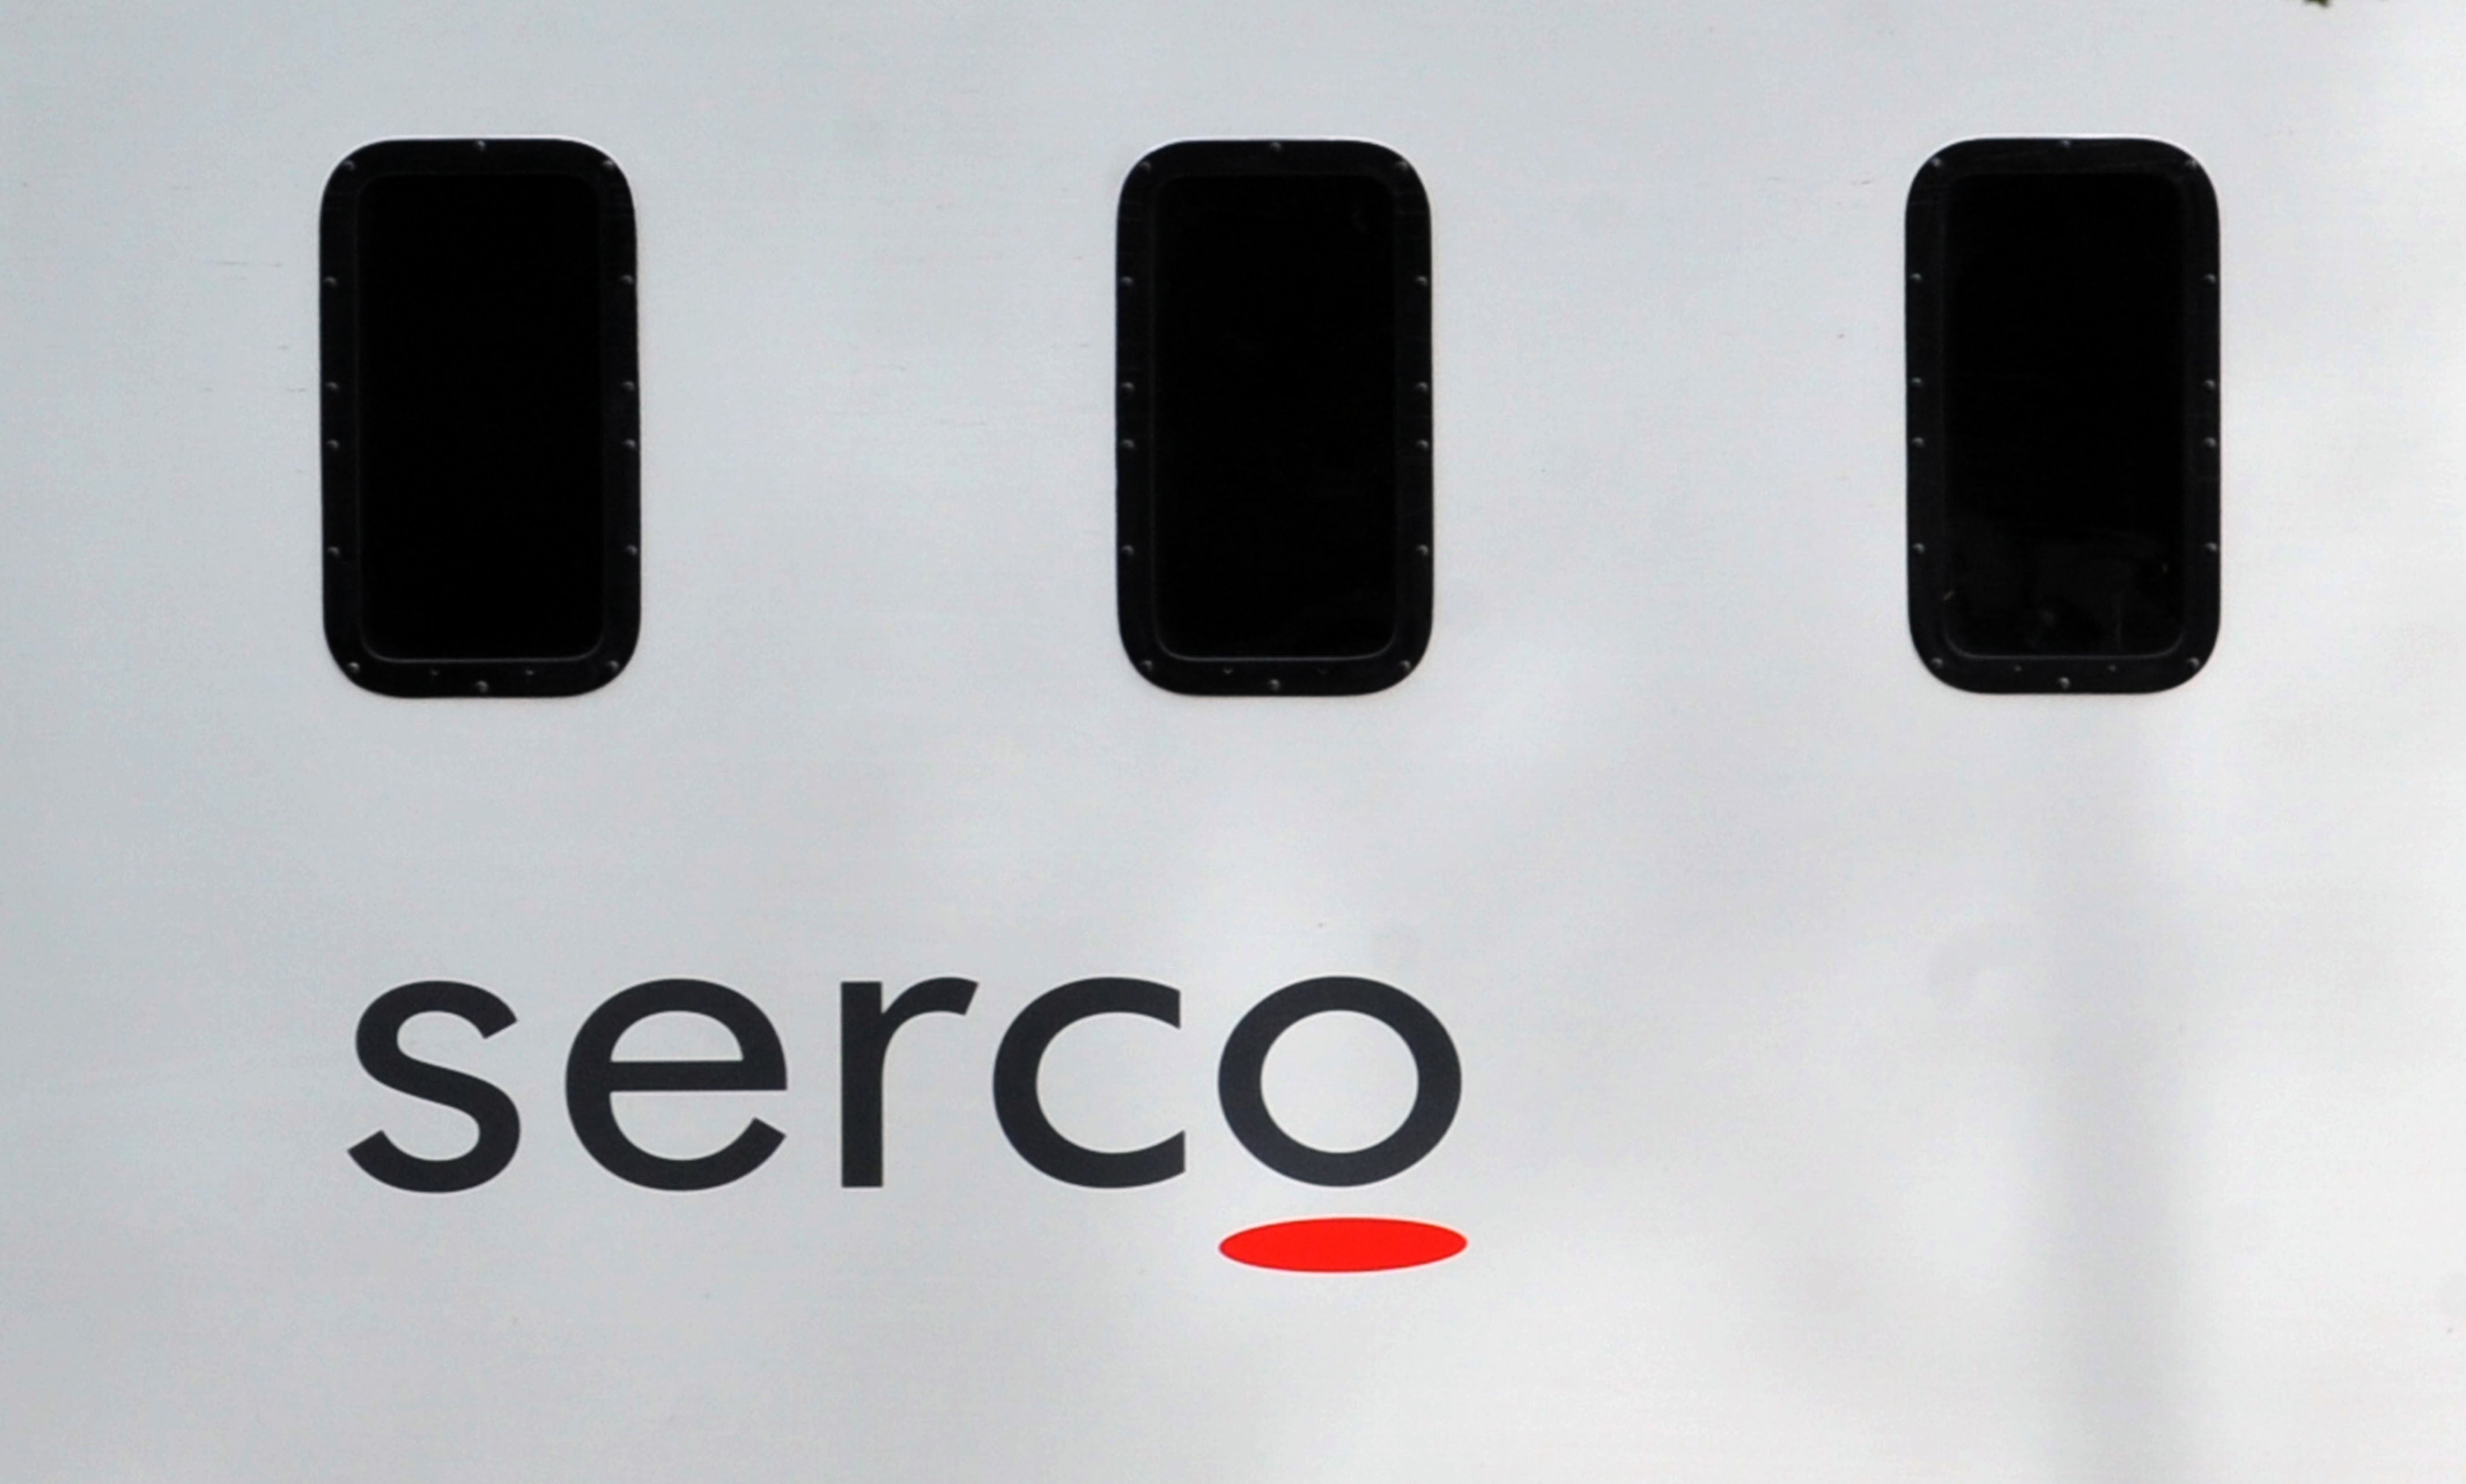 Serco reported that revenues moved 1% higher to £2.18 billion for the half-year to June 30 (Ian Nicholson/PA)